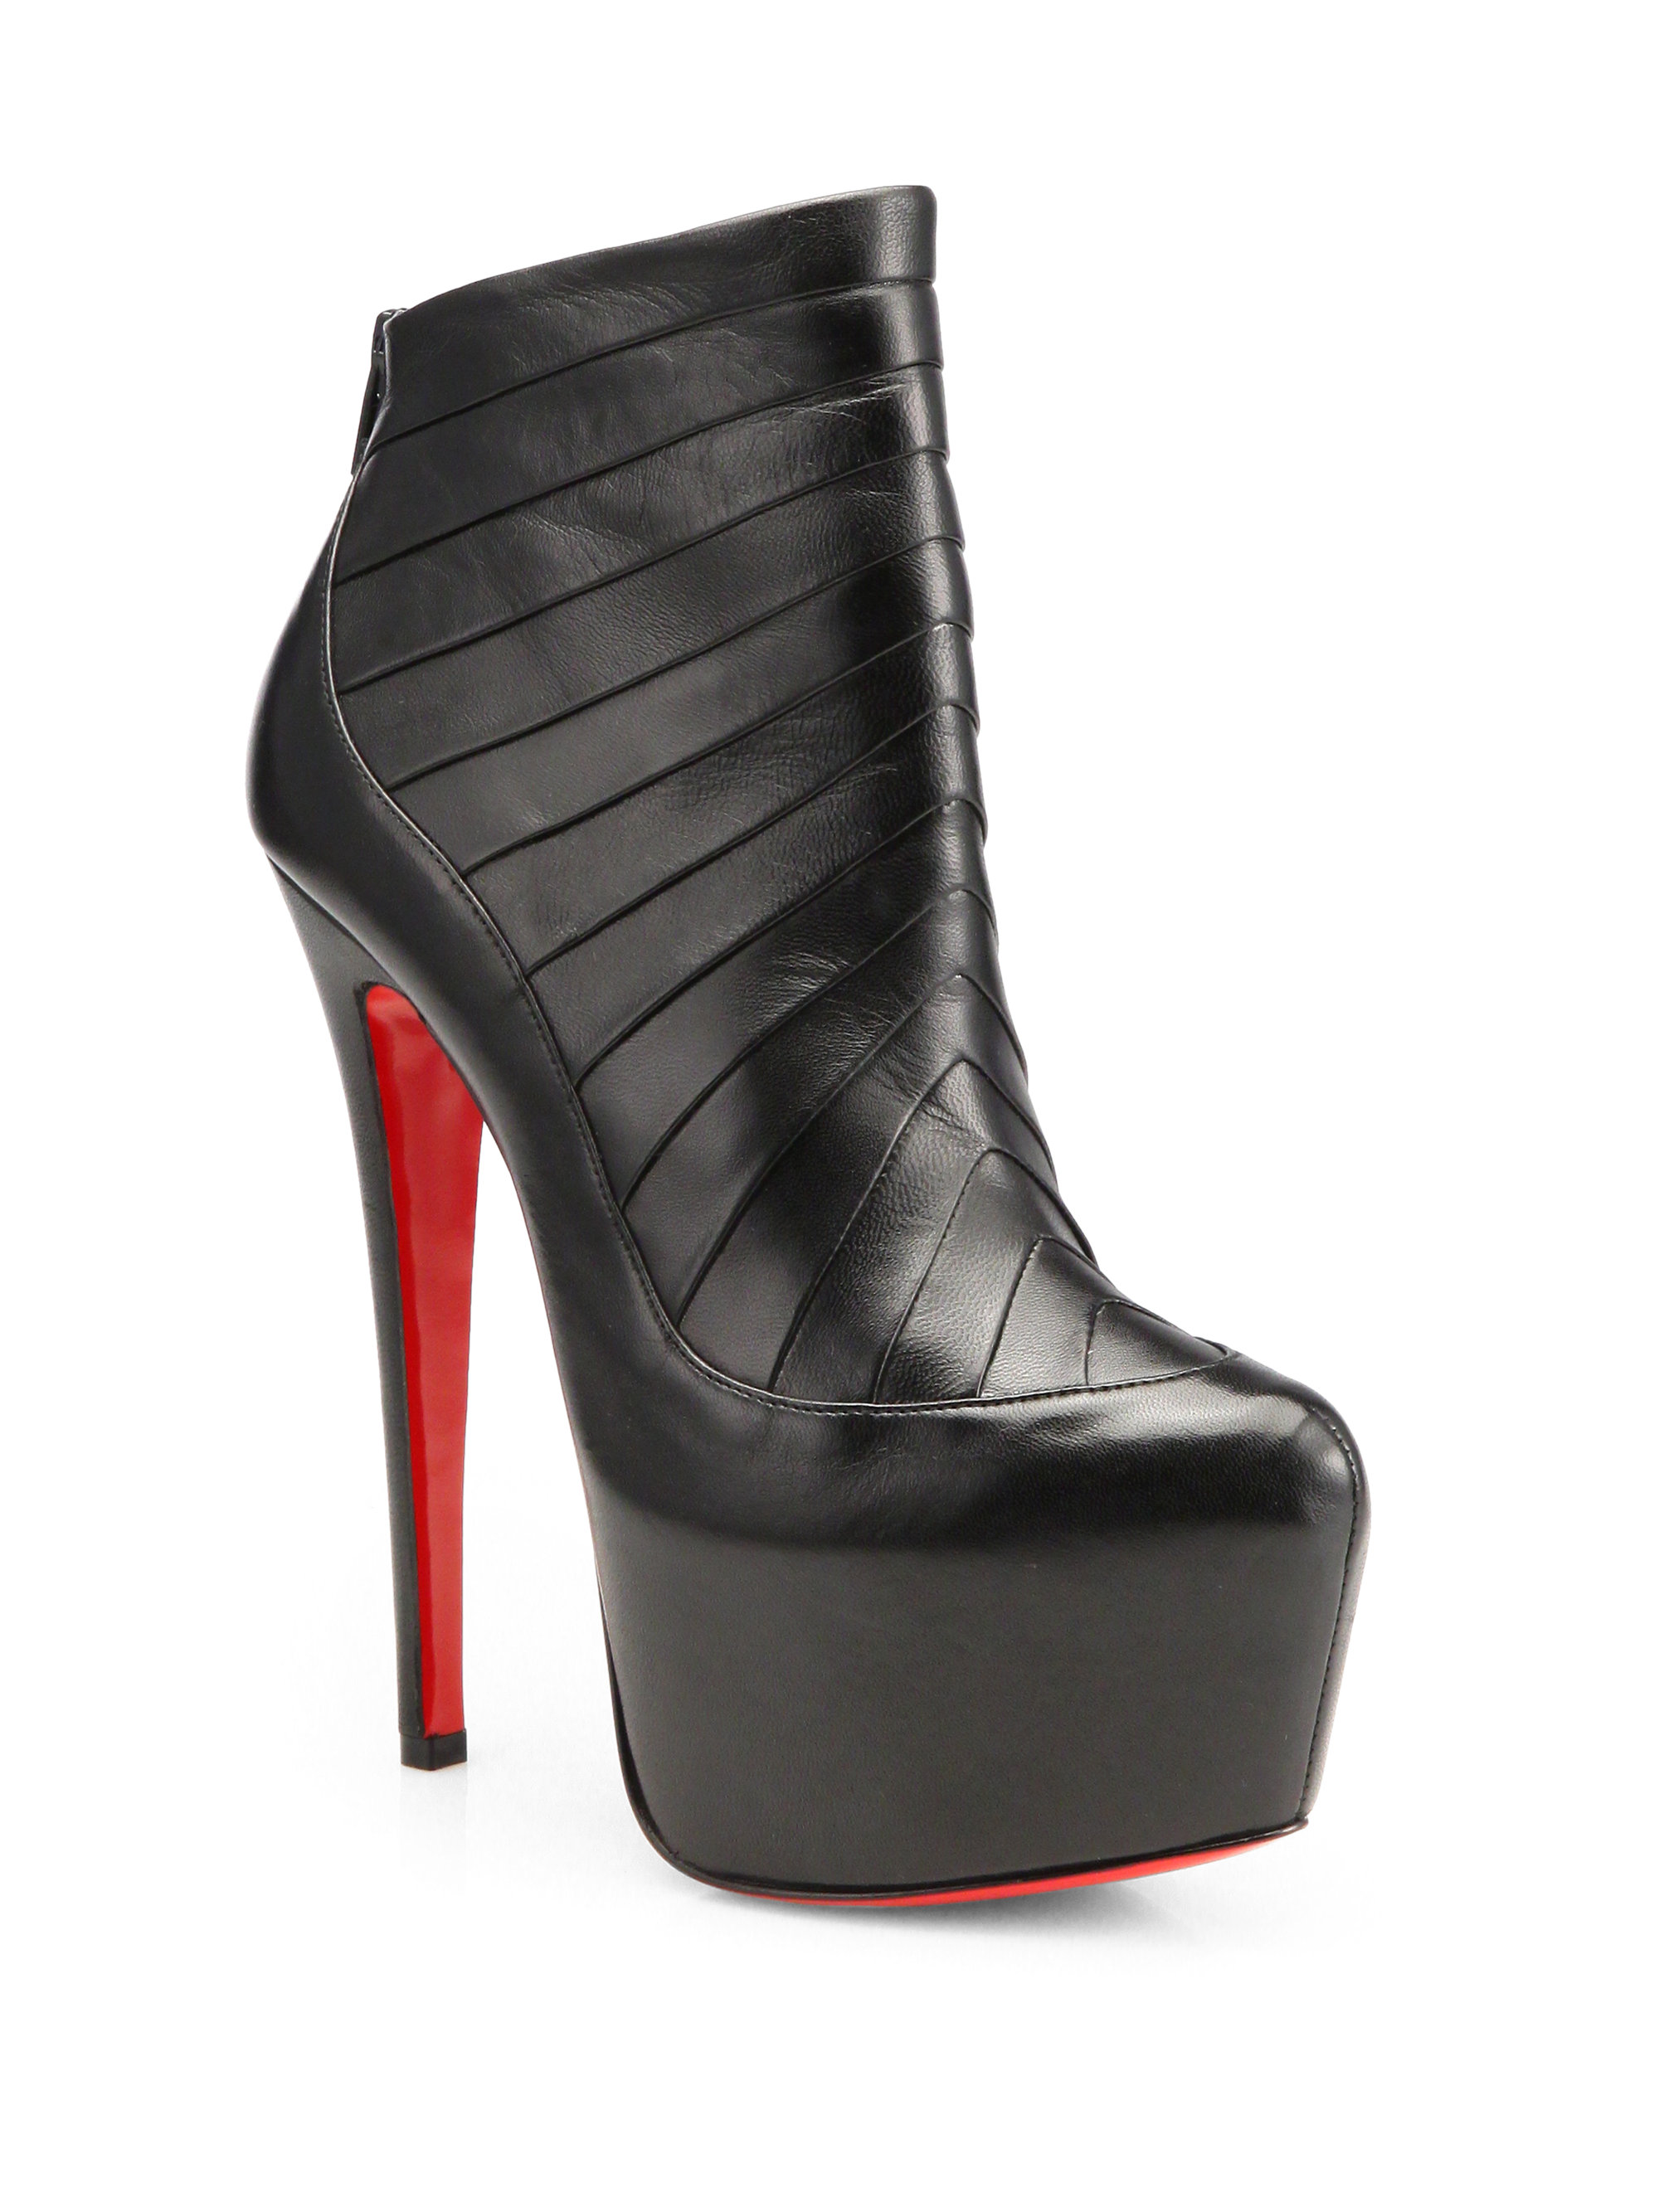 Christian Louboutin Amor Leather Platform Ankle Boots in Black | Lyst